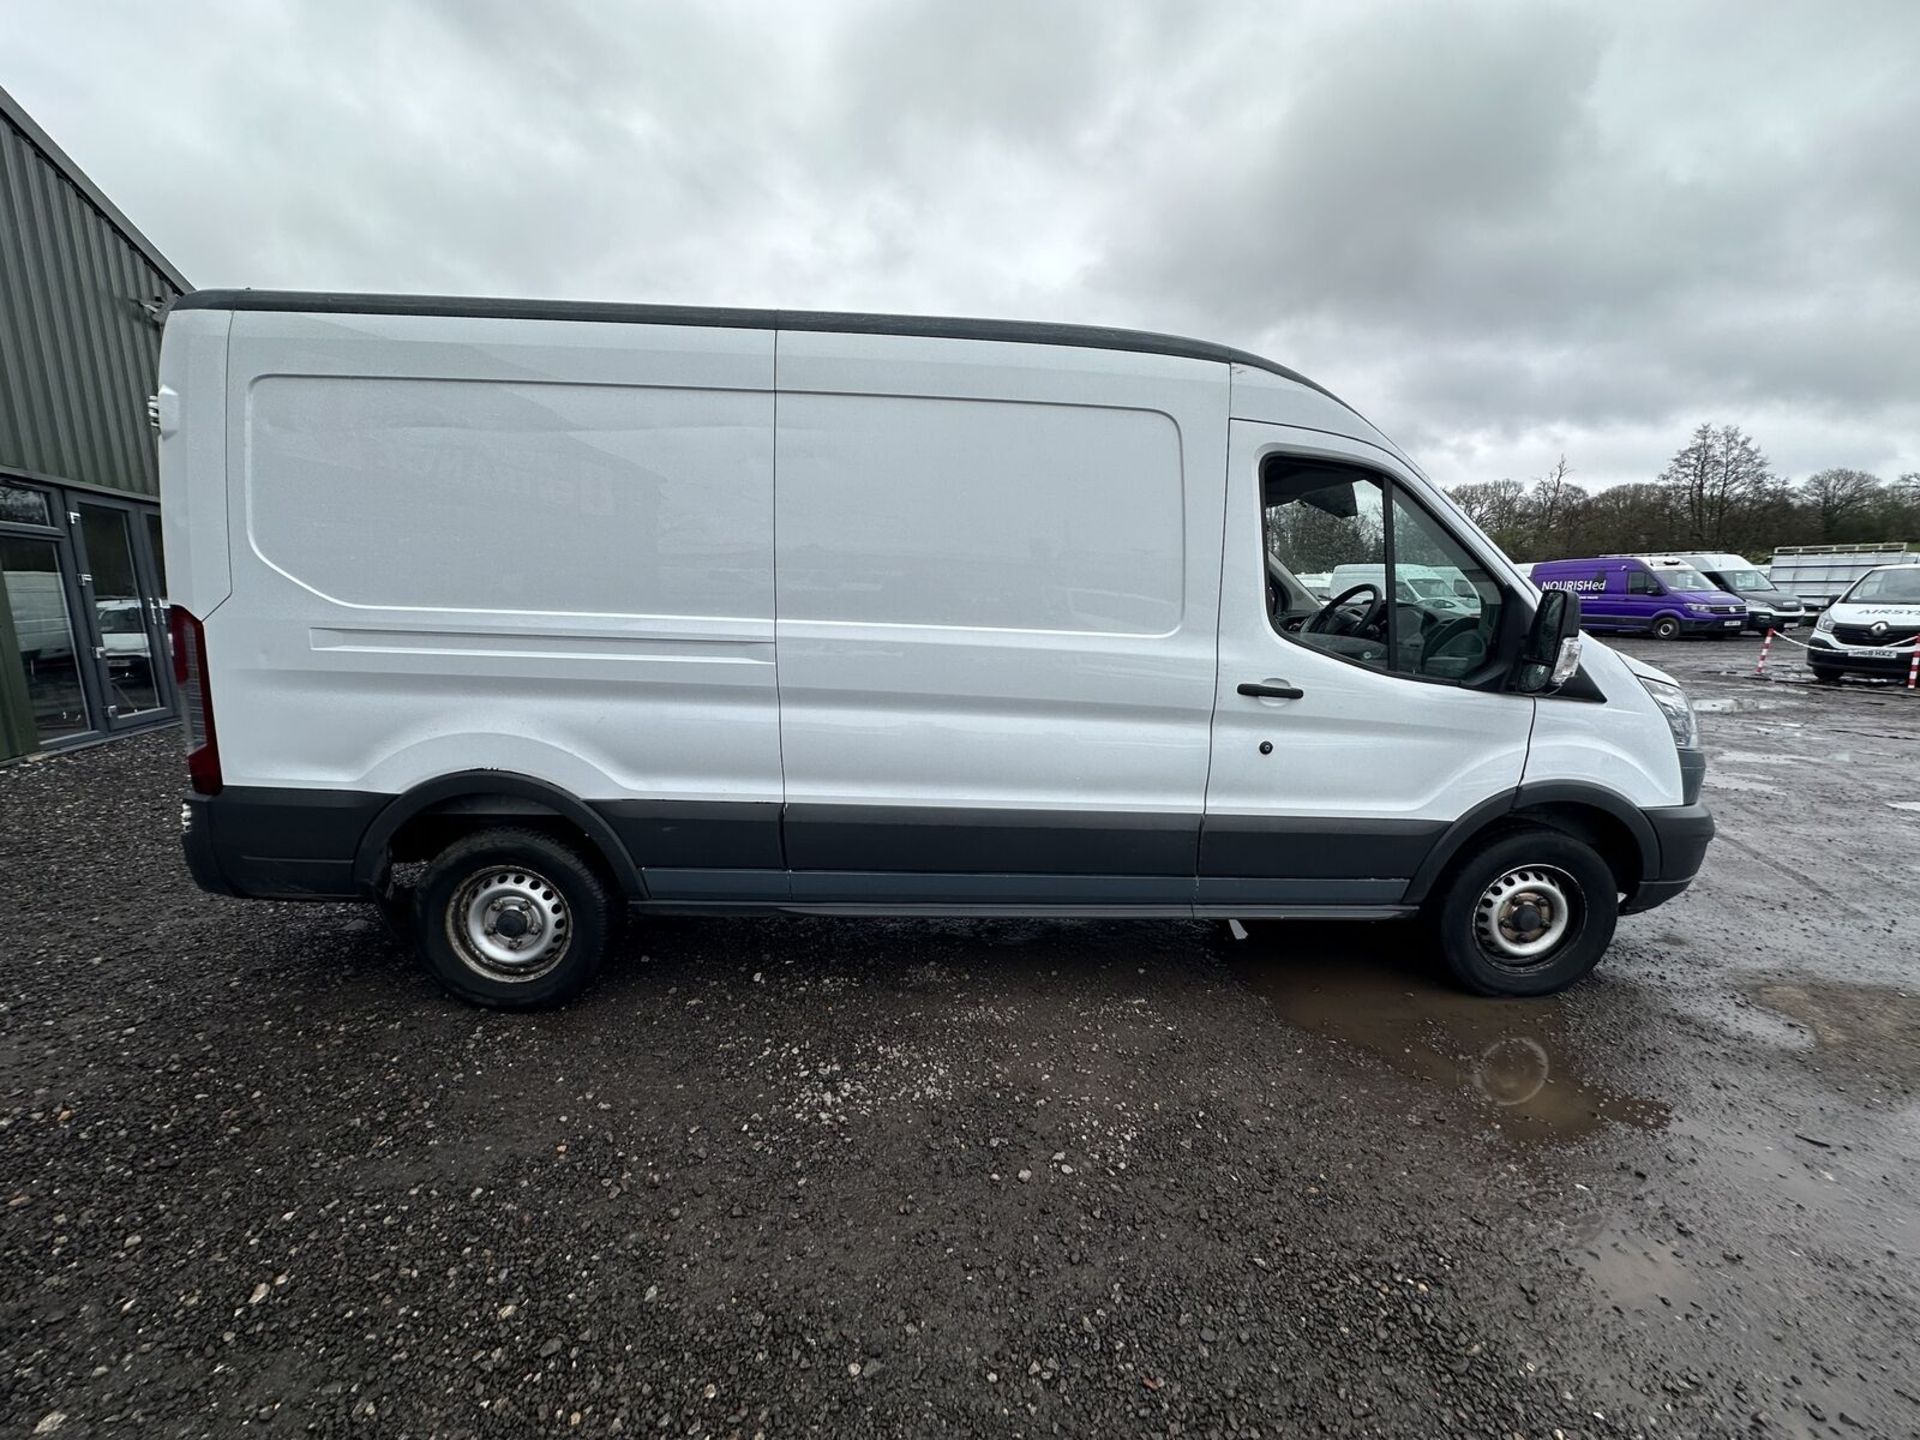 RELIABLE RUNABOUT: 2016 FORD TRANSIT 350 LWB, DIY REPAIR >>--NO VAT ON HAMMER--<< - Image 2 of 15